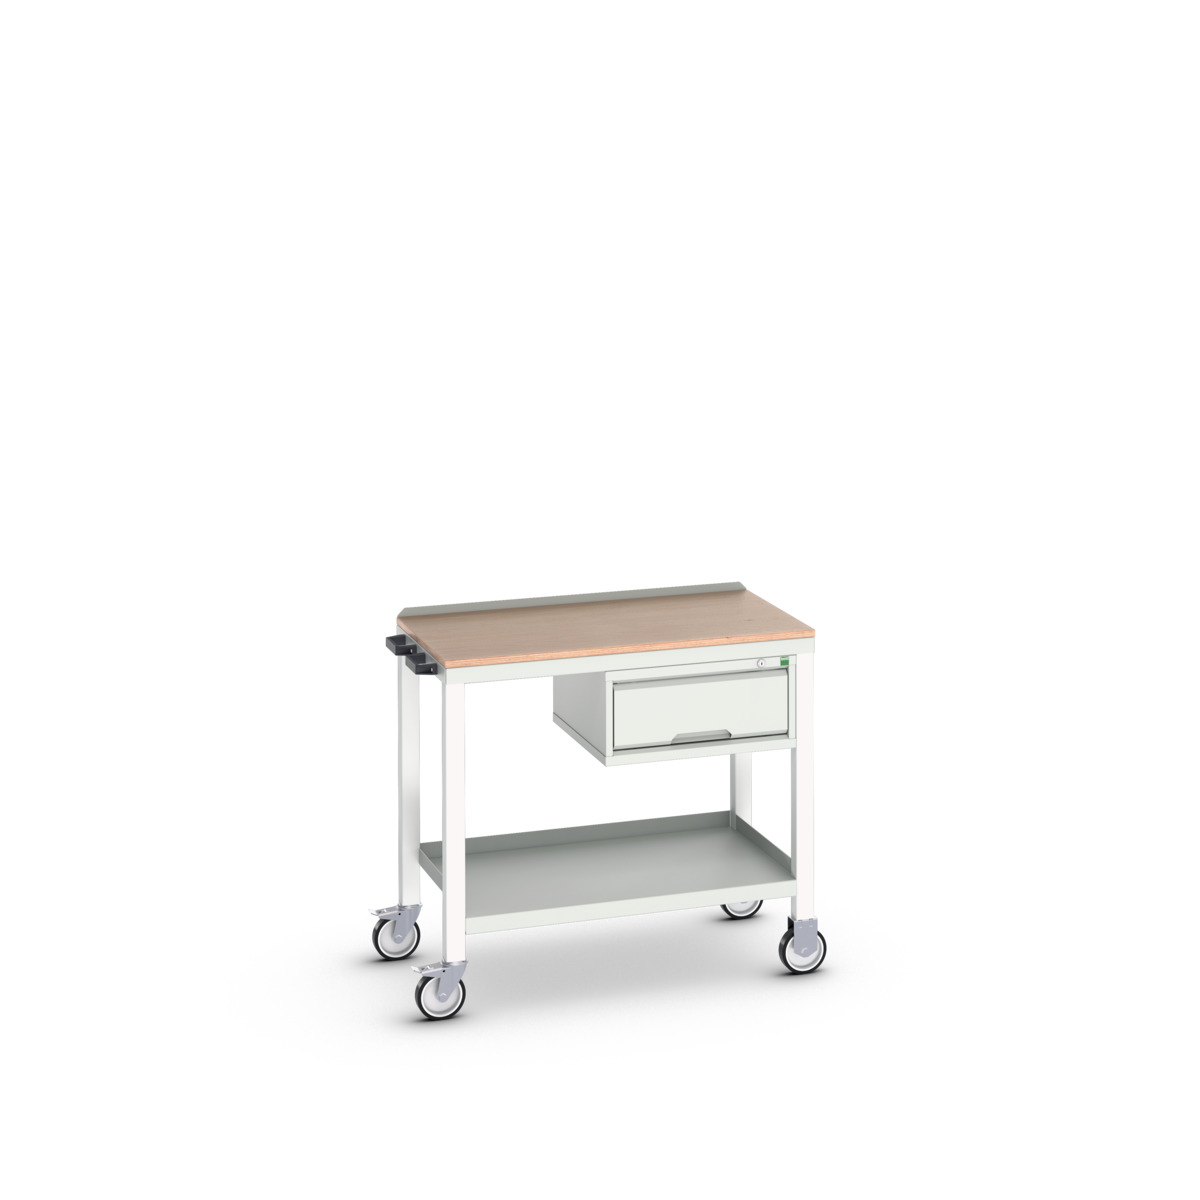 16922801.16 - verso mobile welded bench